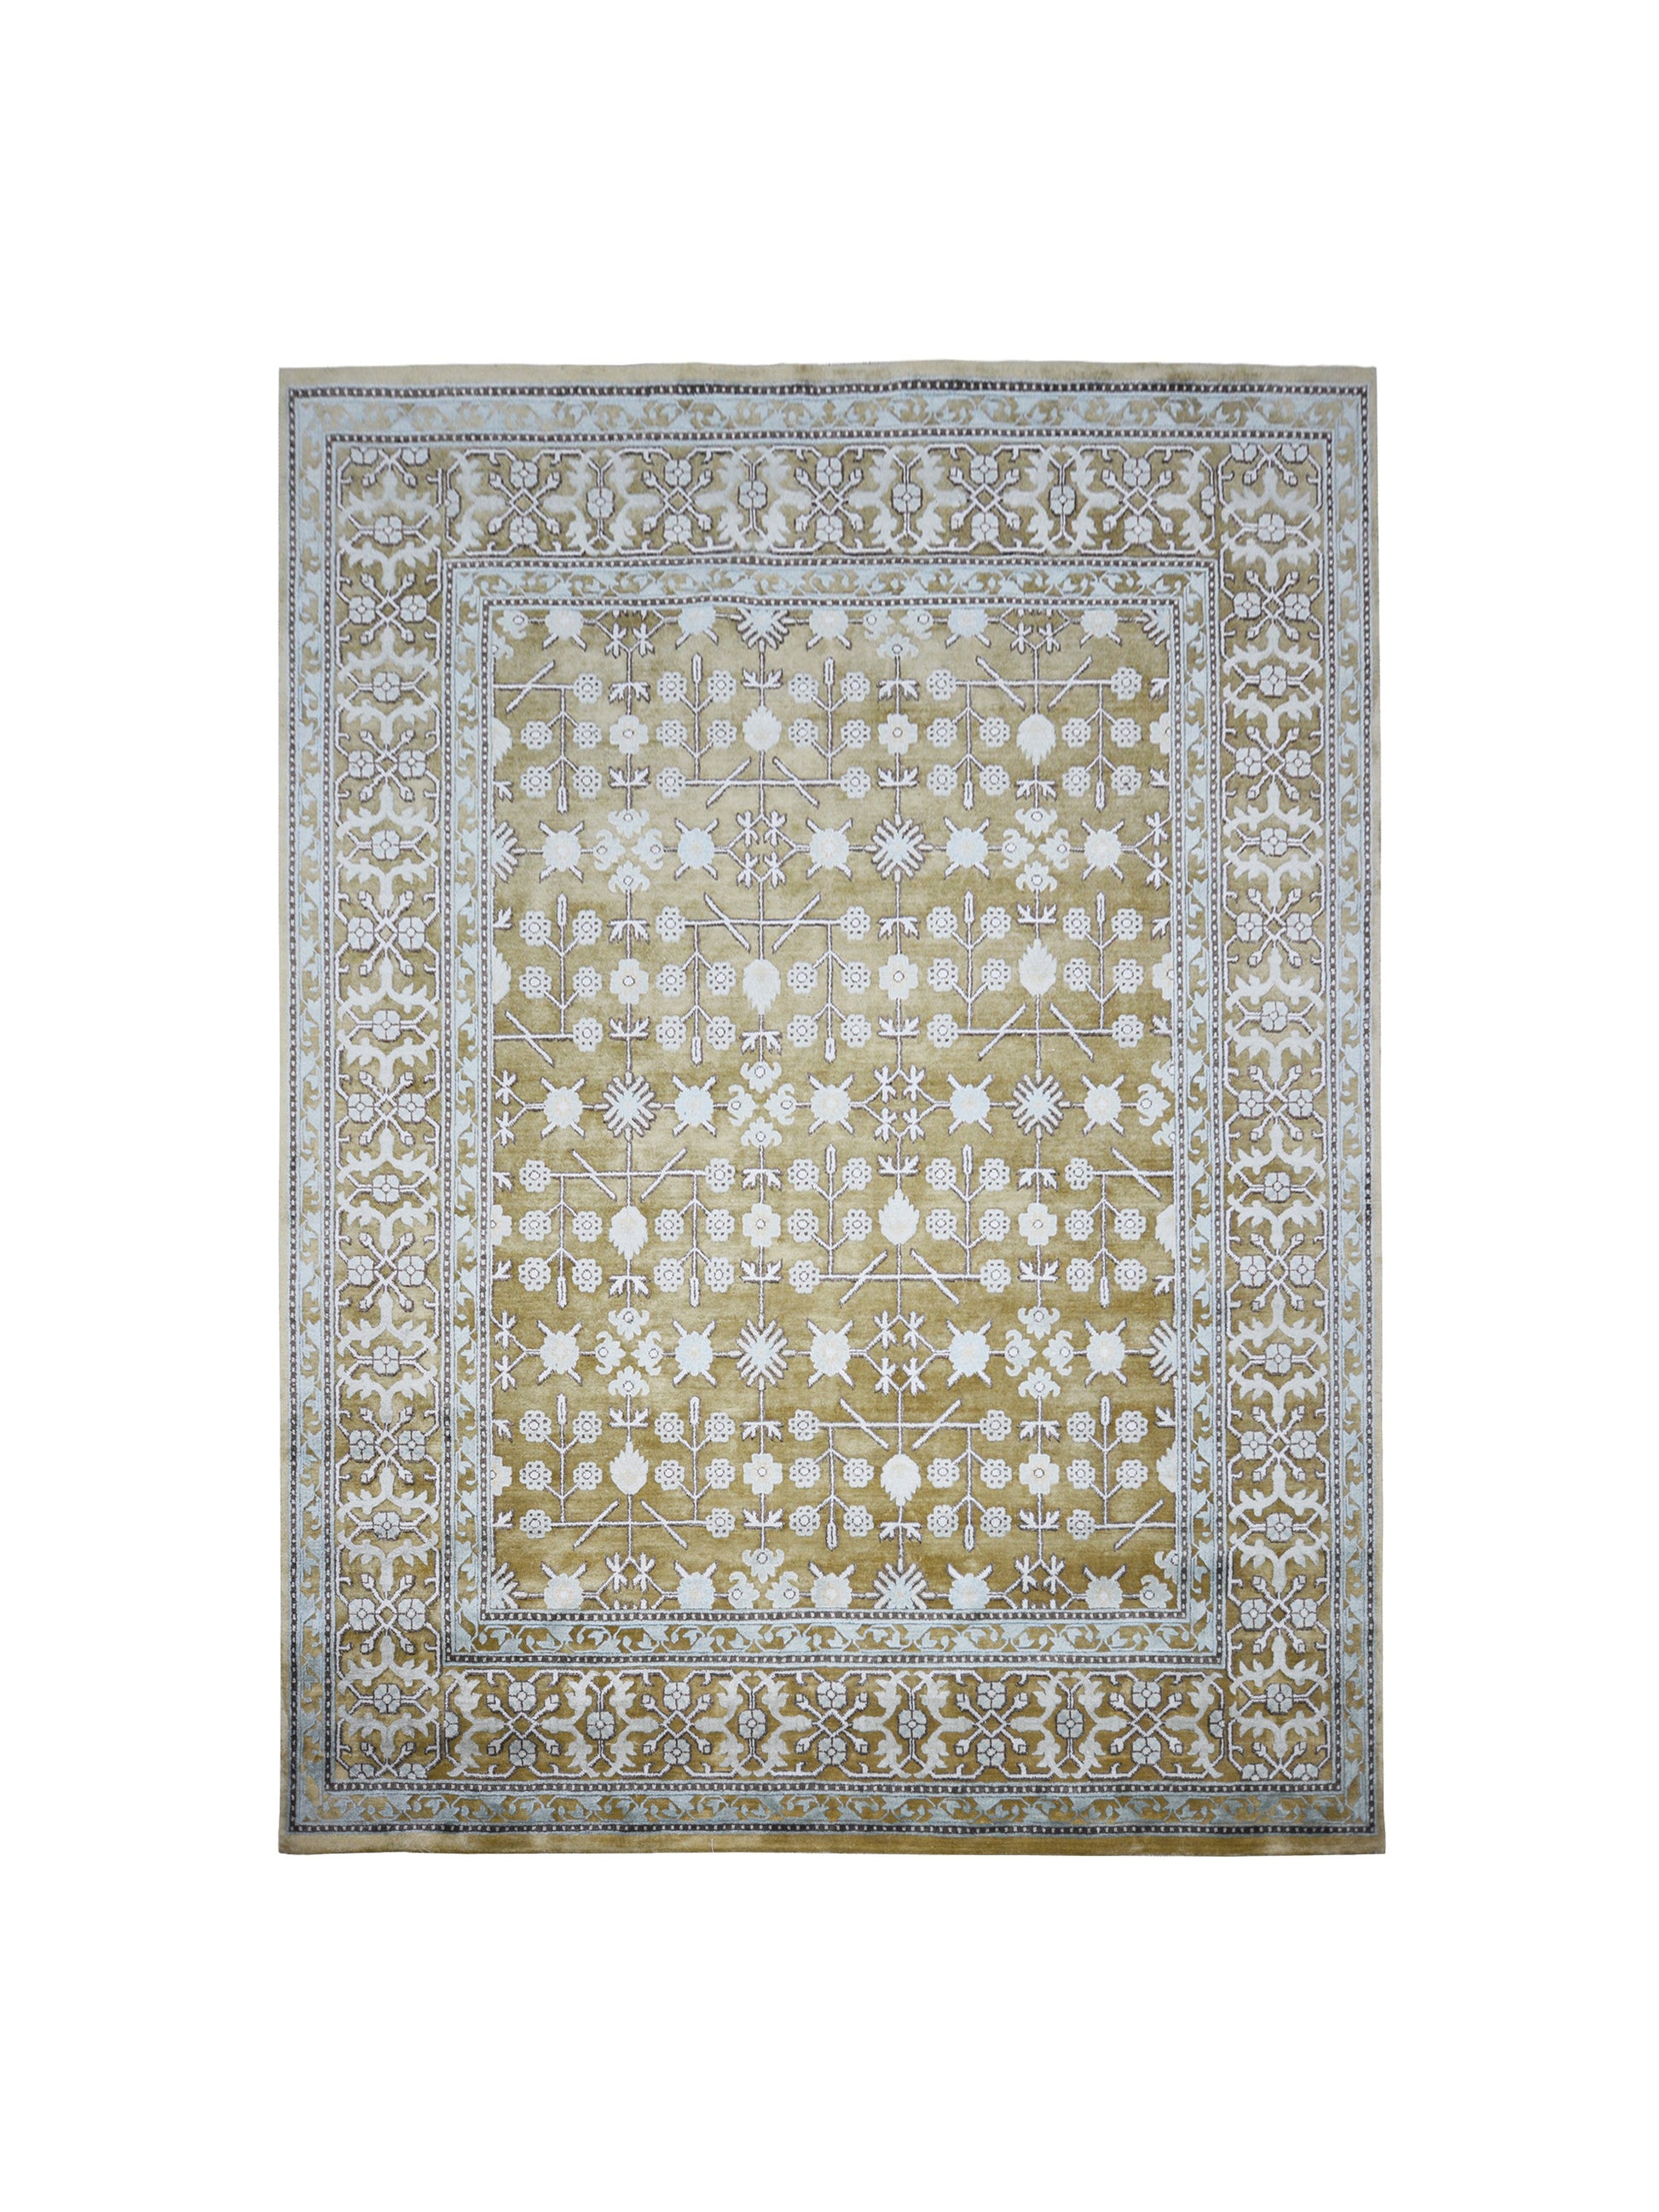 Get trendy with Samarkand Garden Camel, Ivory and Light Blue Traditional Handknotted Area Rug - Traditional Rugs available at Jaipur Oriental Rugs. Grab yours for $4285.00 today!